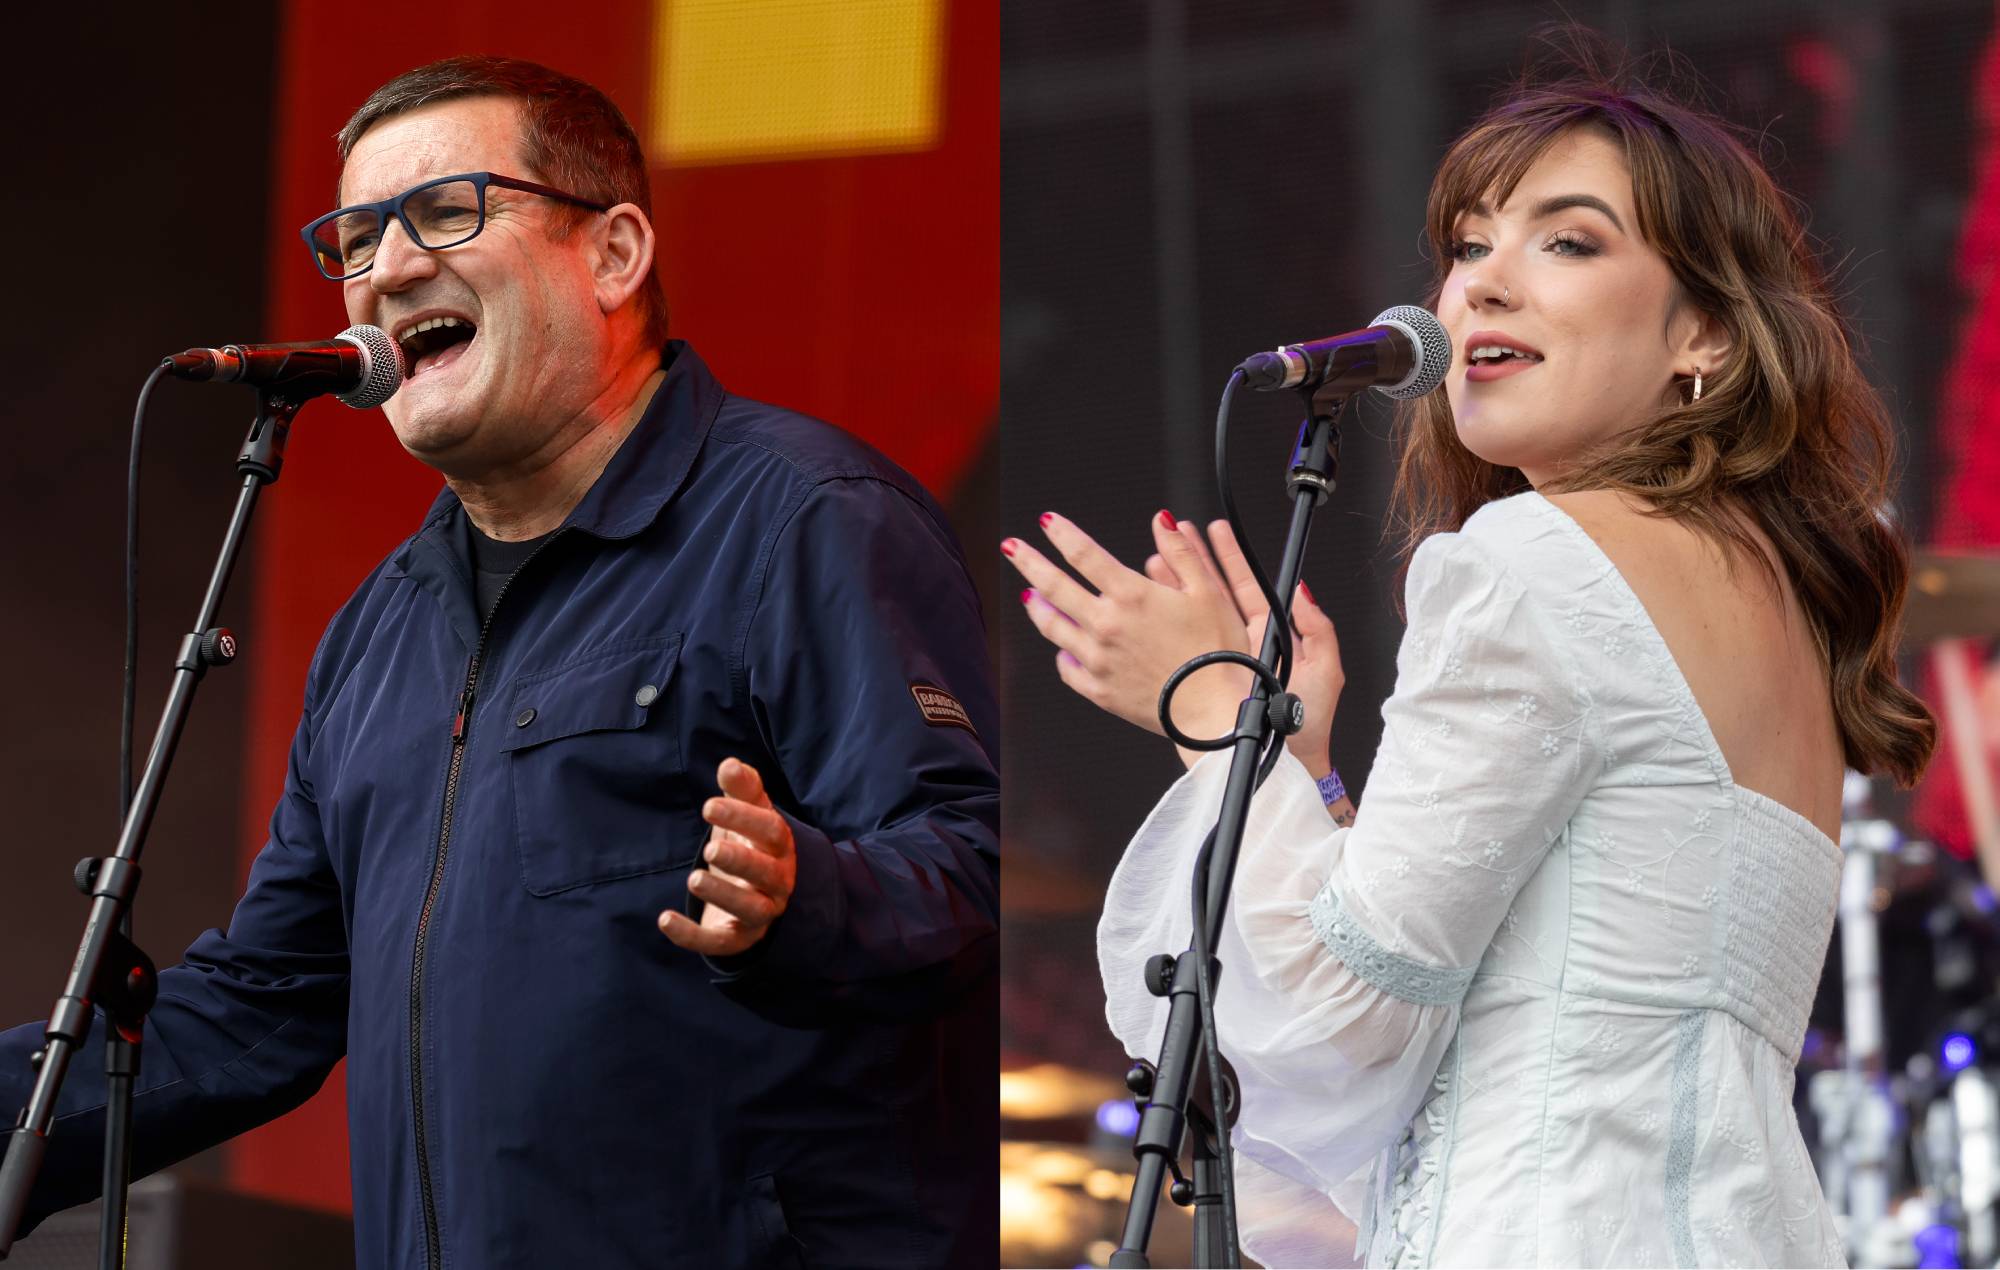 Rianne Downey joins Paul Heaton on stage at Glastonbury